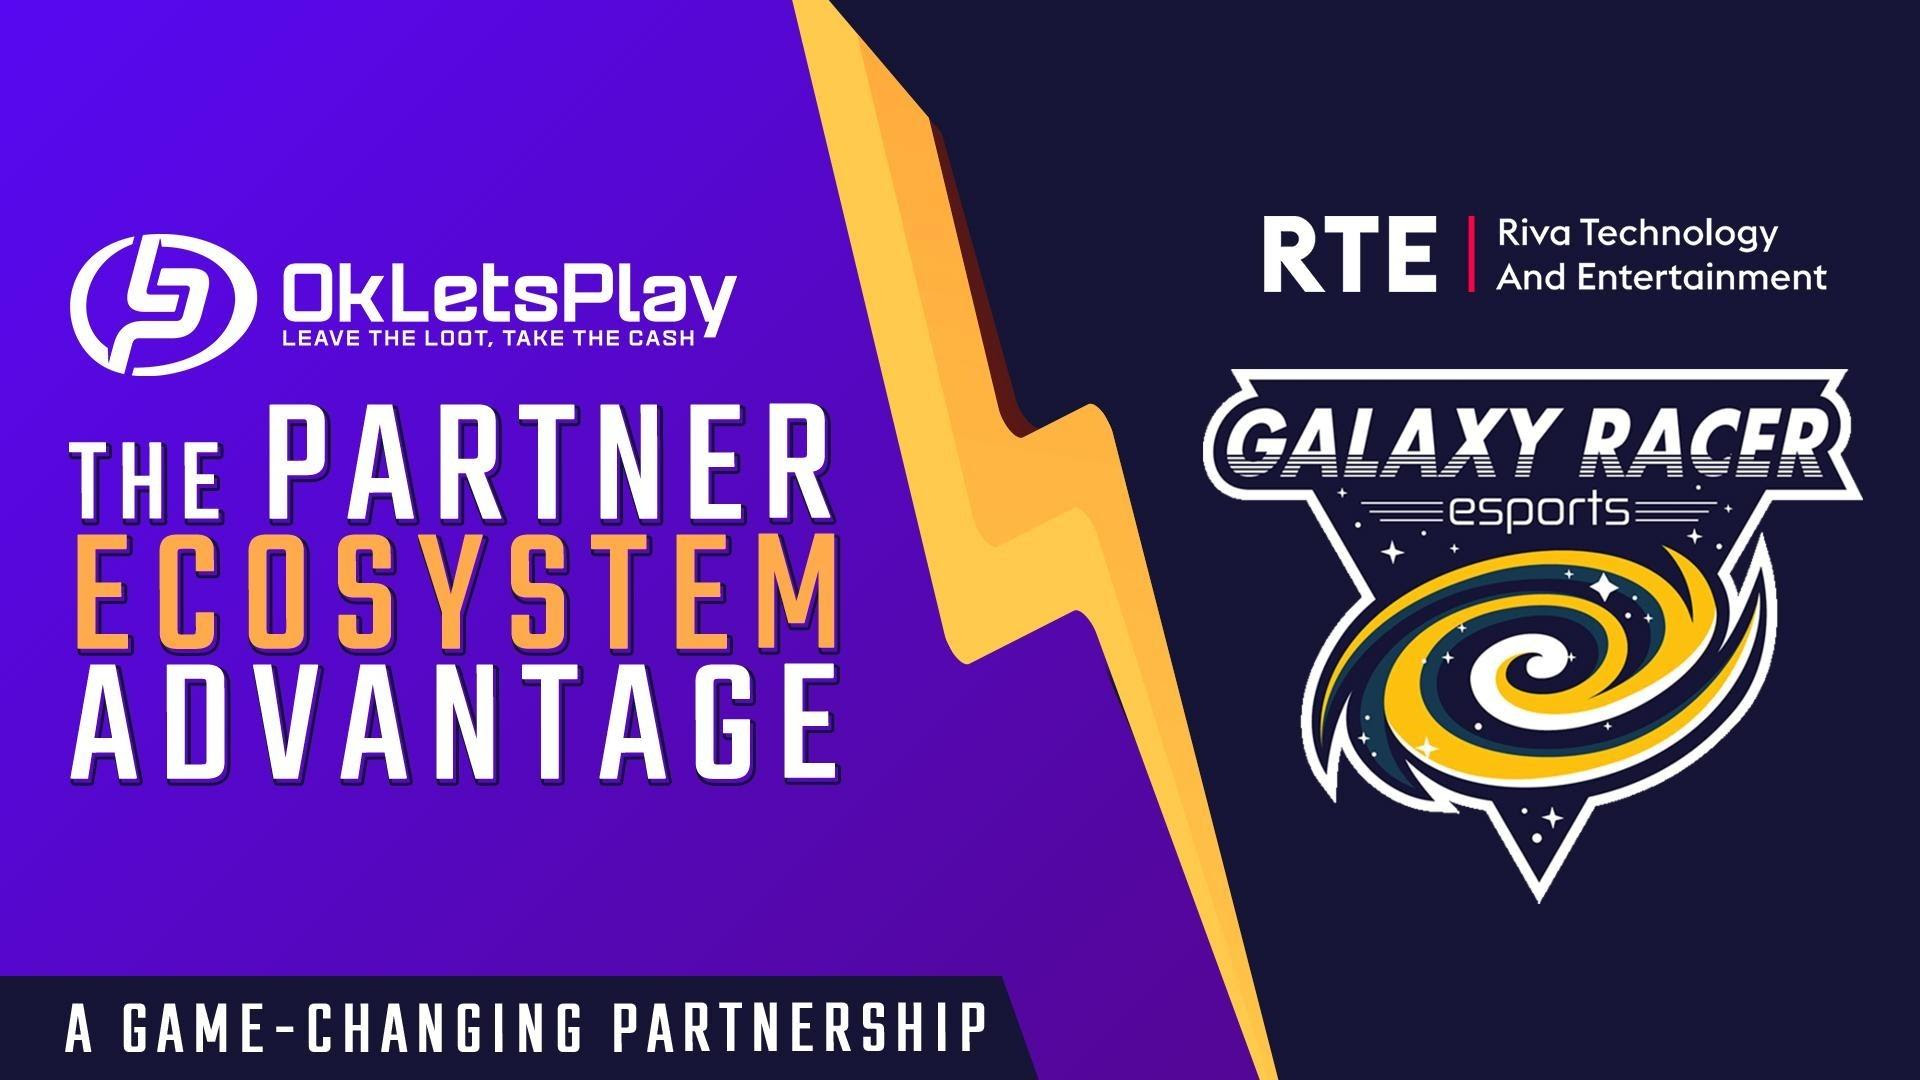 OkLetsPlay Announce Partnership With RTE (Riva Technology & Entertainment) and Galaxy Racer